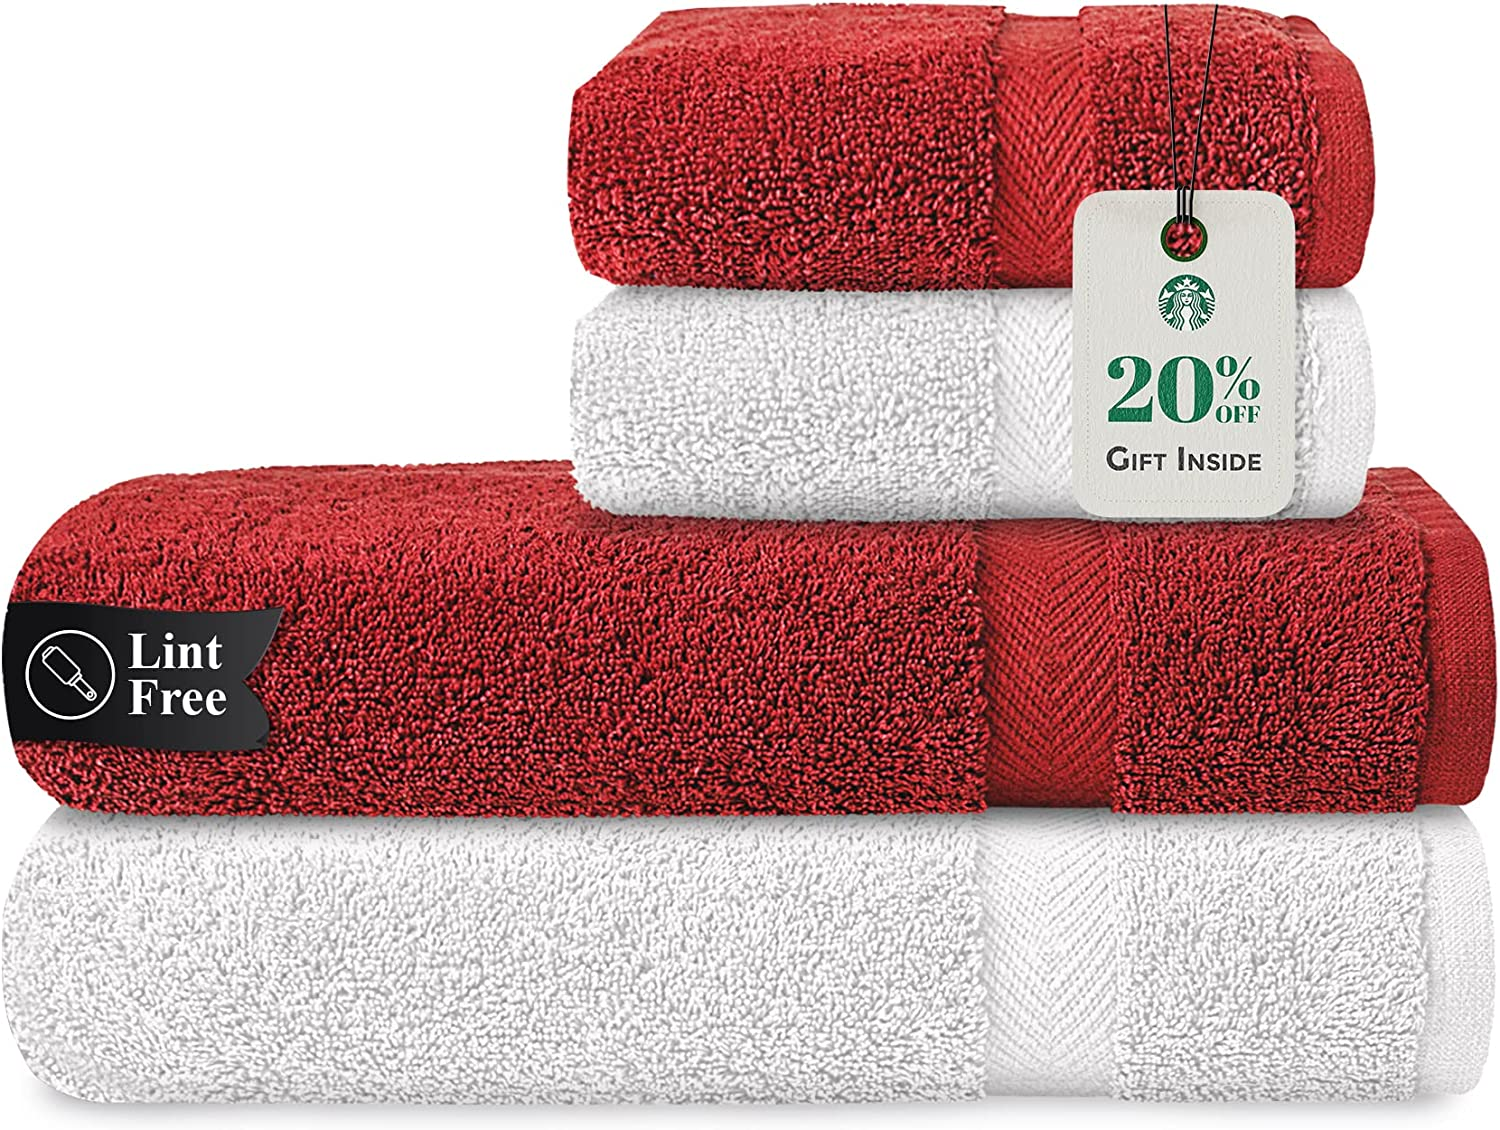 Stony Edge Towel Set, 2 Bath Towels & 2 Hand Towels, 100% Cotton, 600 GSM, Soft & Absorbent for Bathroom, Kitchen, Gym & Spa, White & Gray